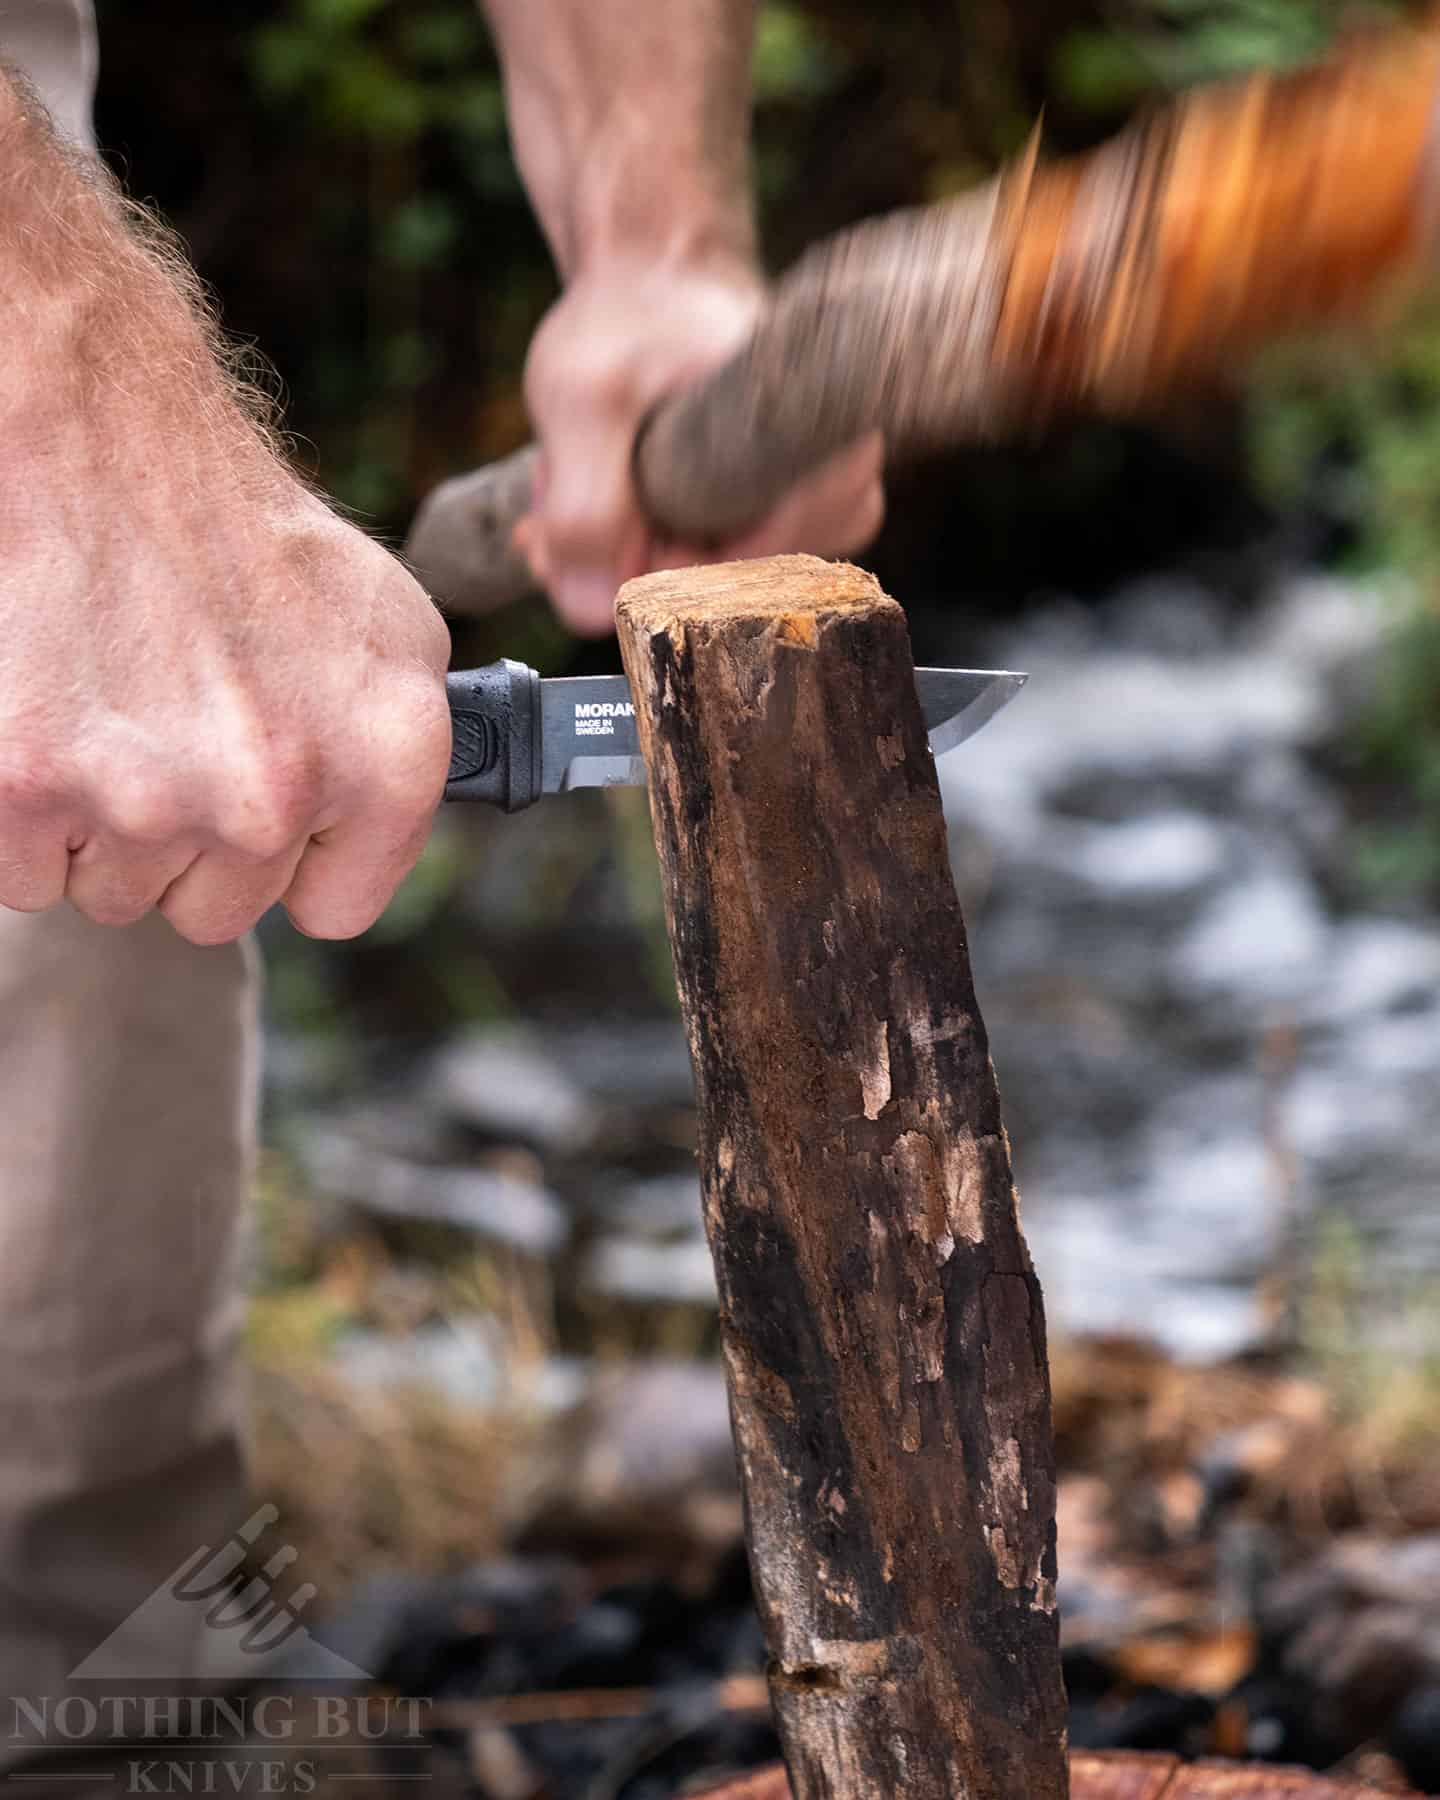 The Mora Garberg is tough enough for batoning, chopping and  most other hard-use type outdoor tasks. 